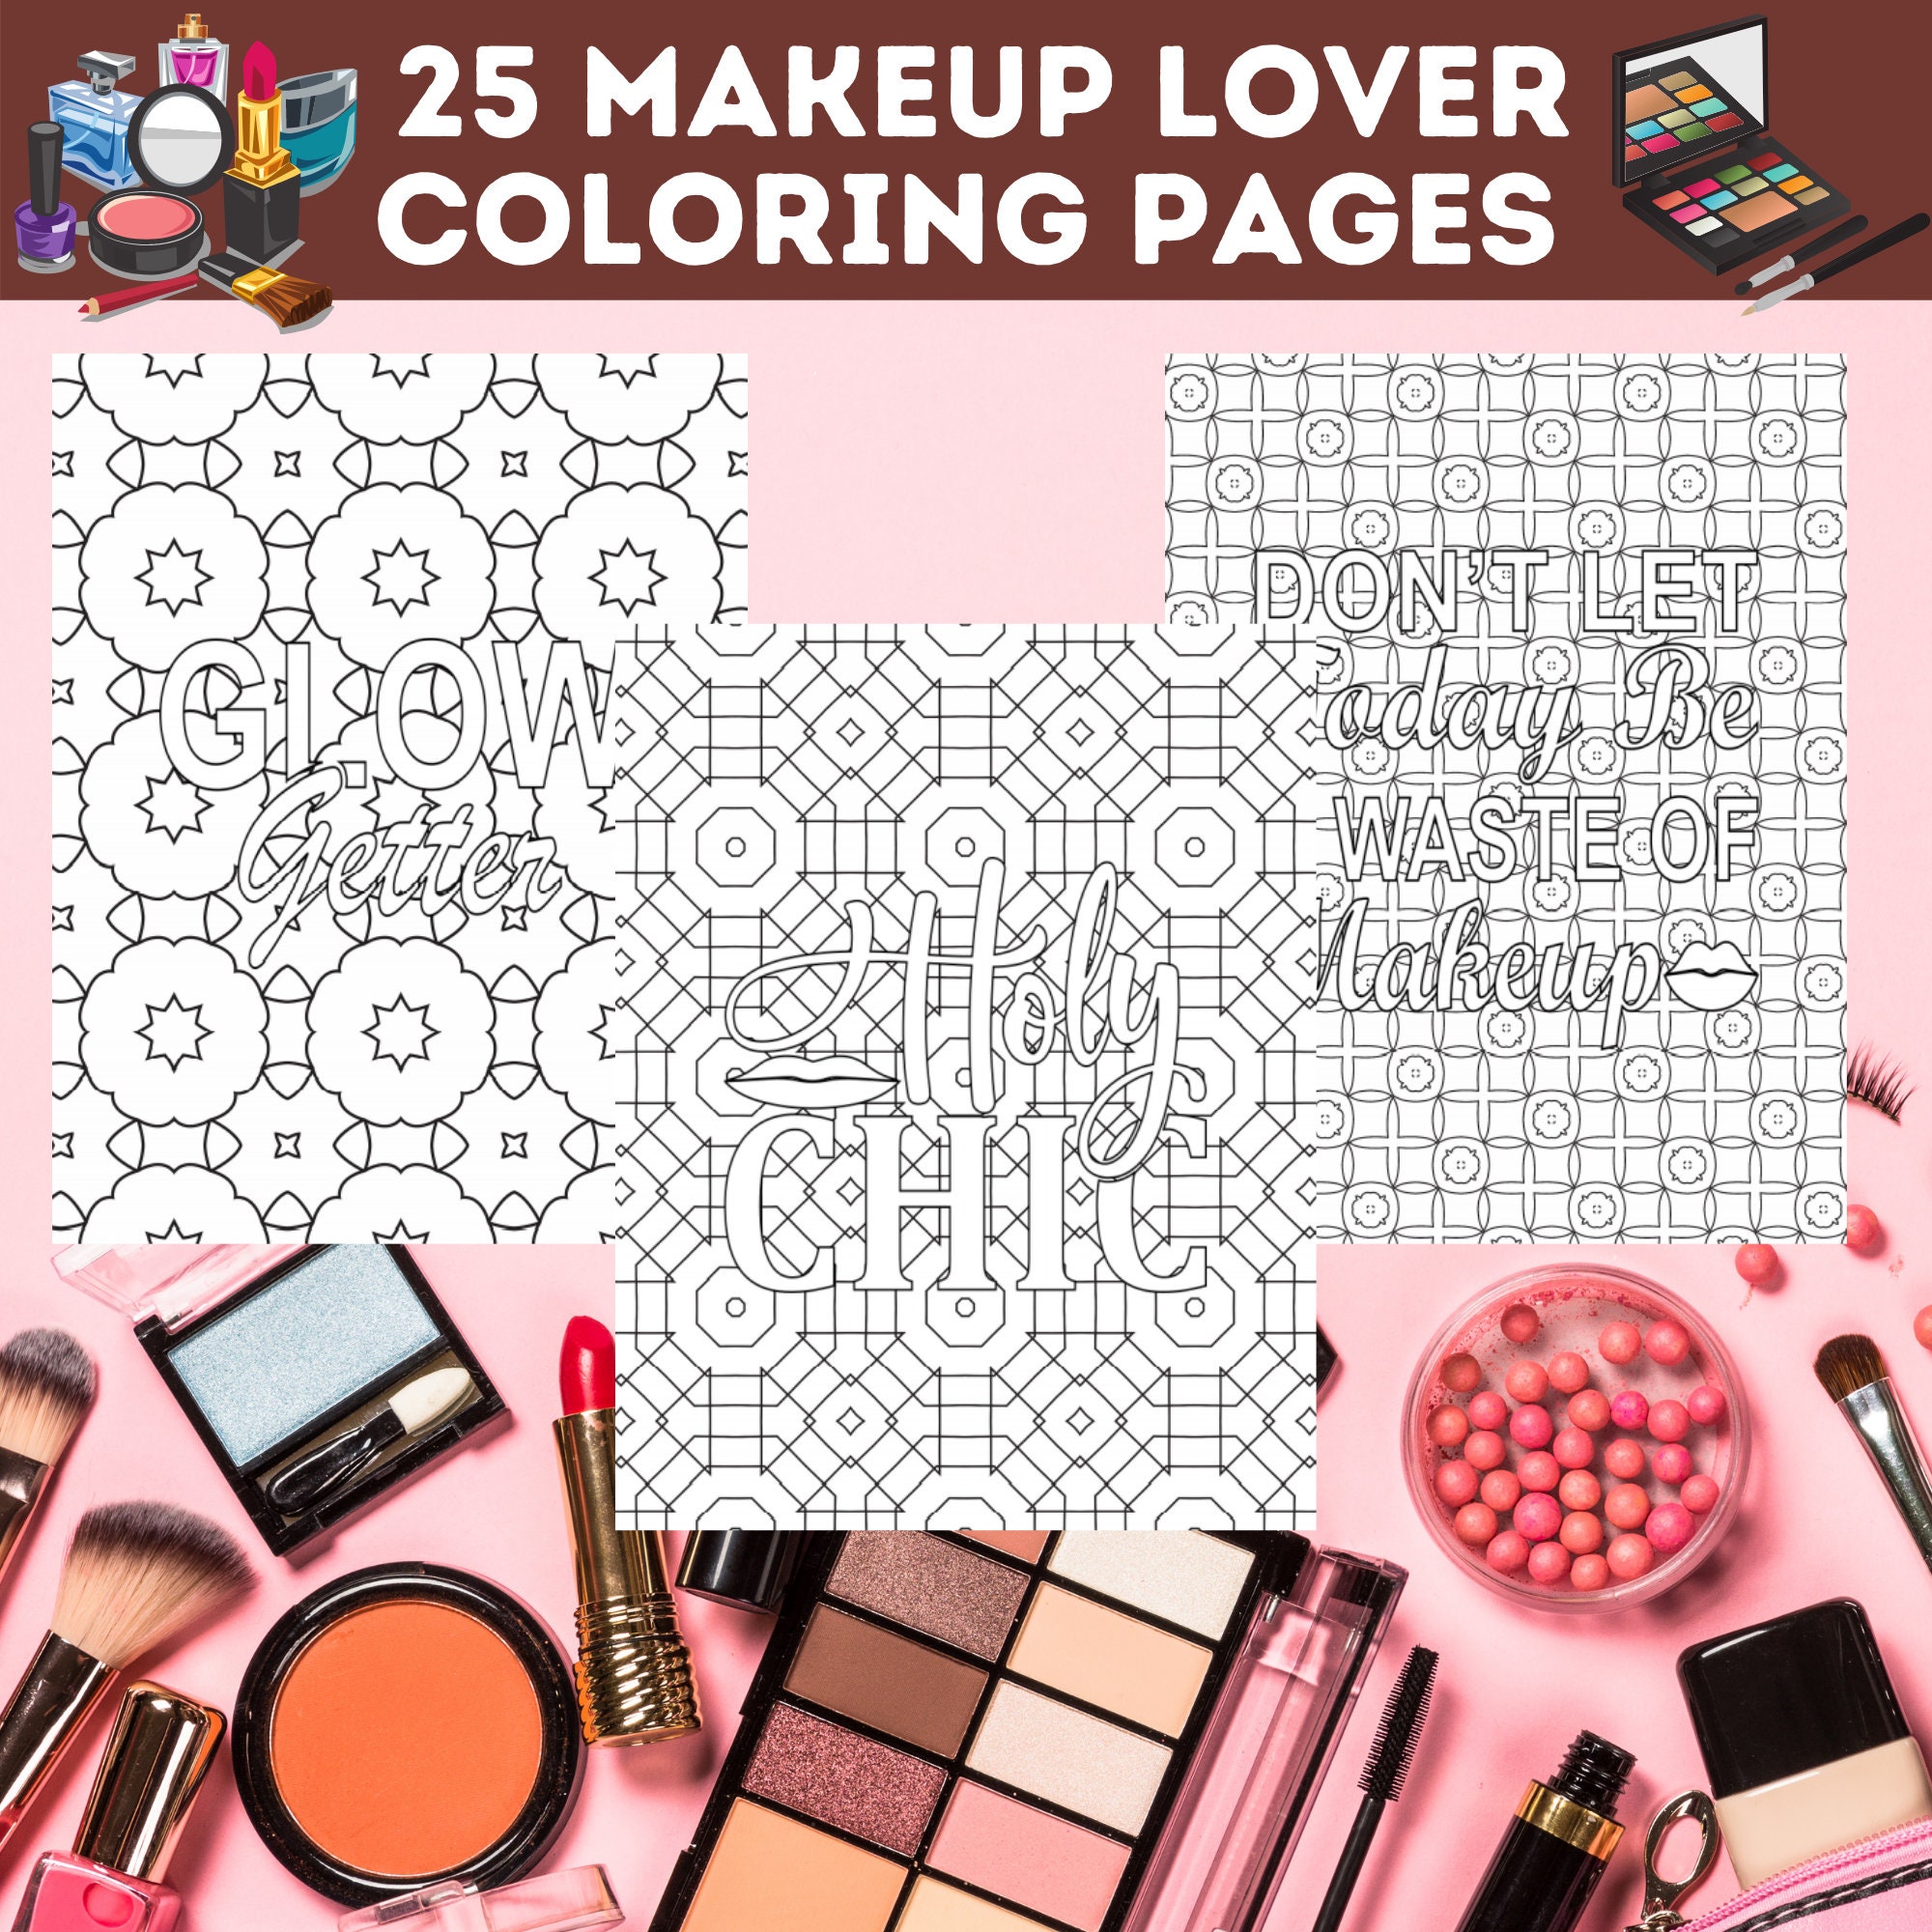 Makeup lover coloring pages bundle glamour makeup printable coloring pages for fashionistas and makeup lovers instant download